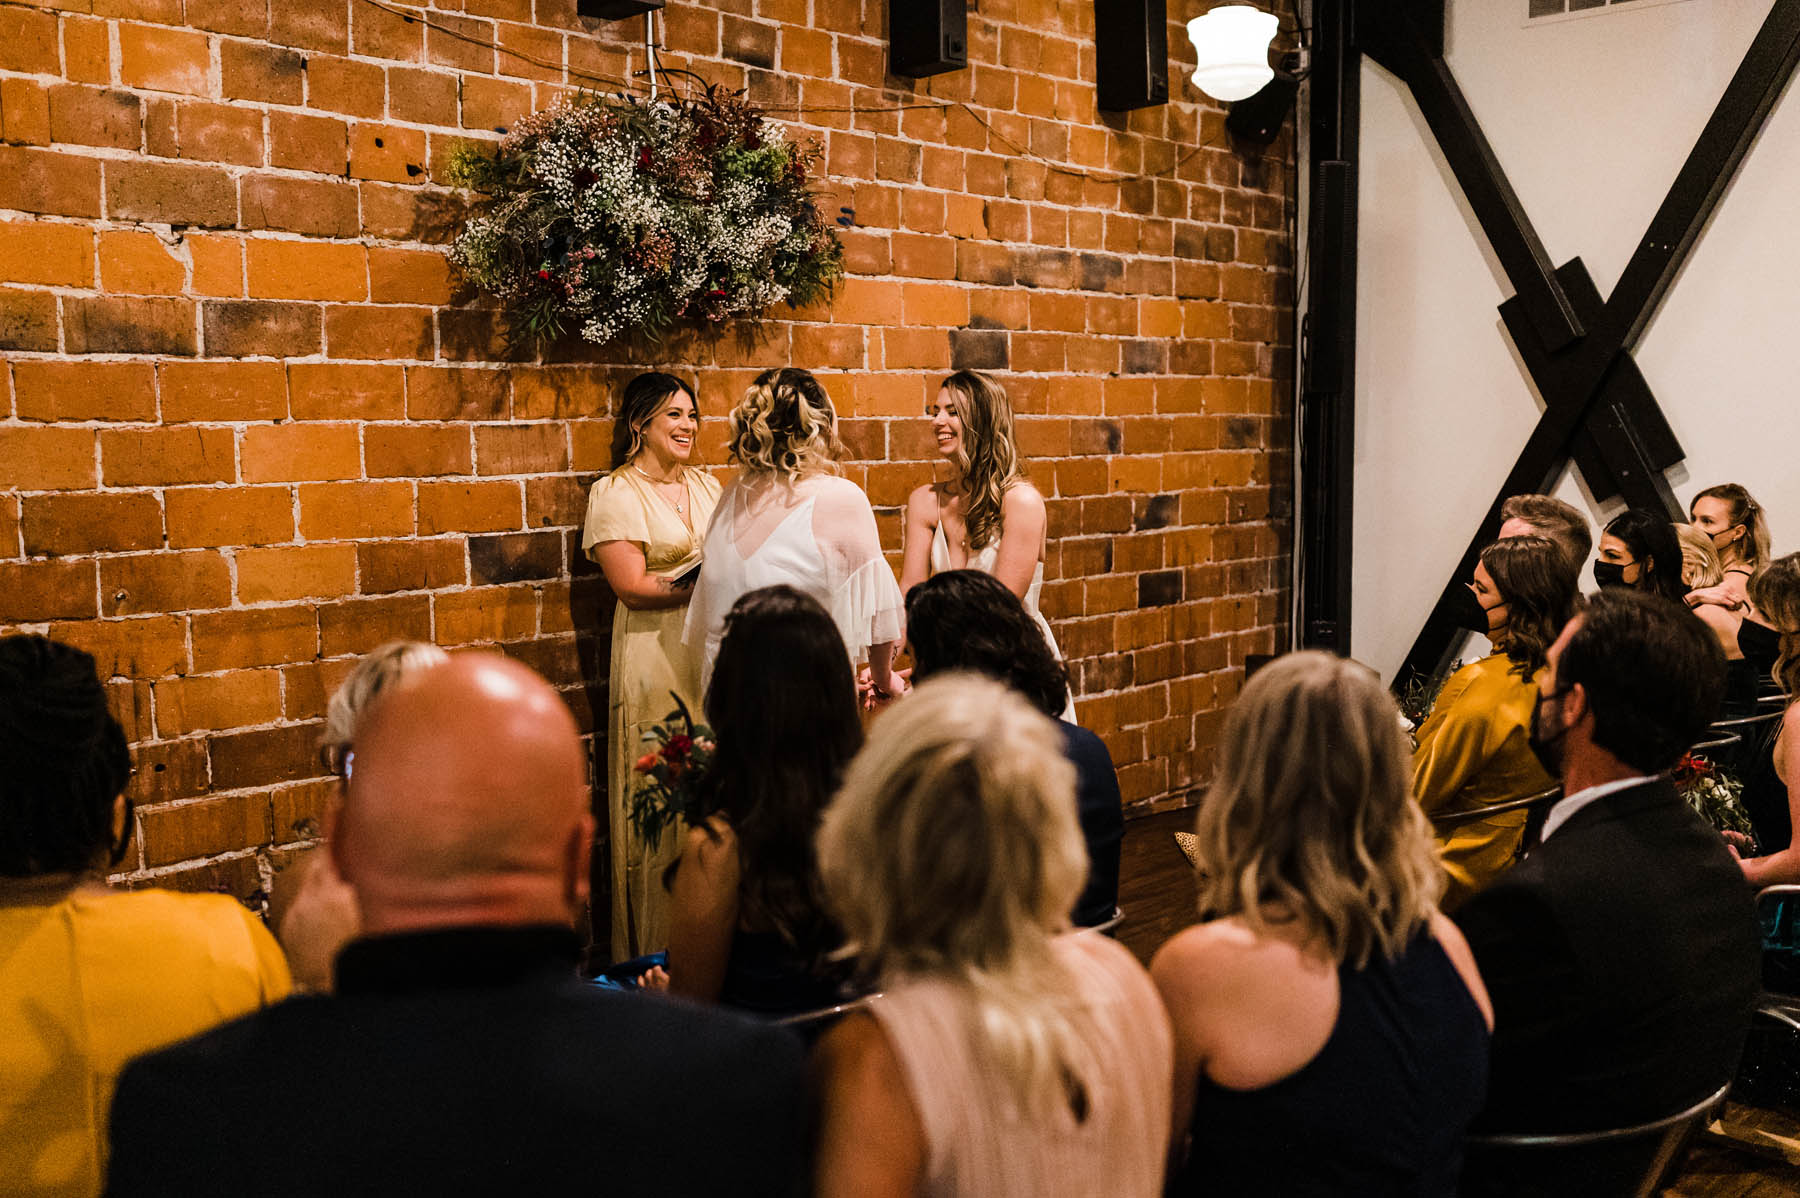 Two people stand in front of their attendants in a brick building, exchanging vows.